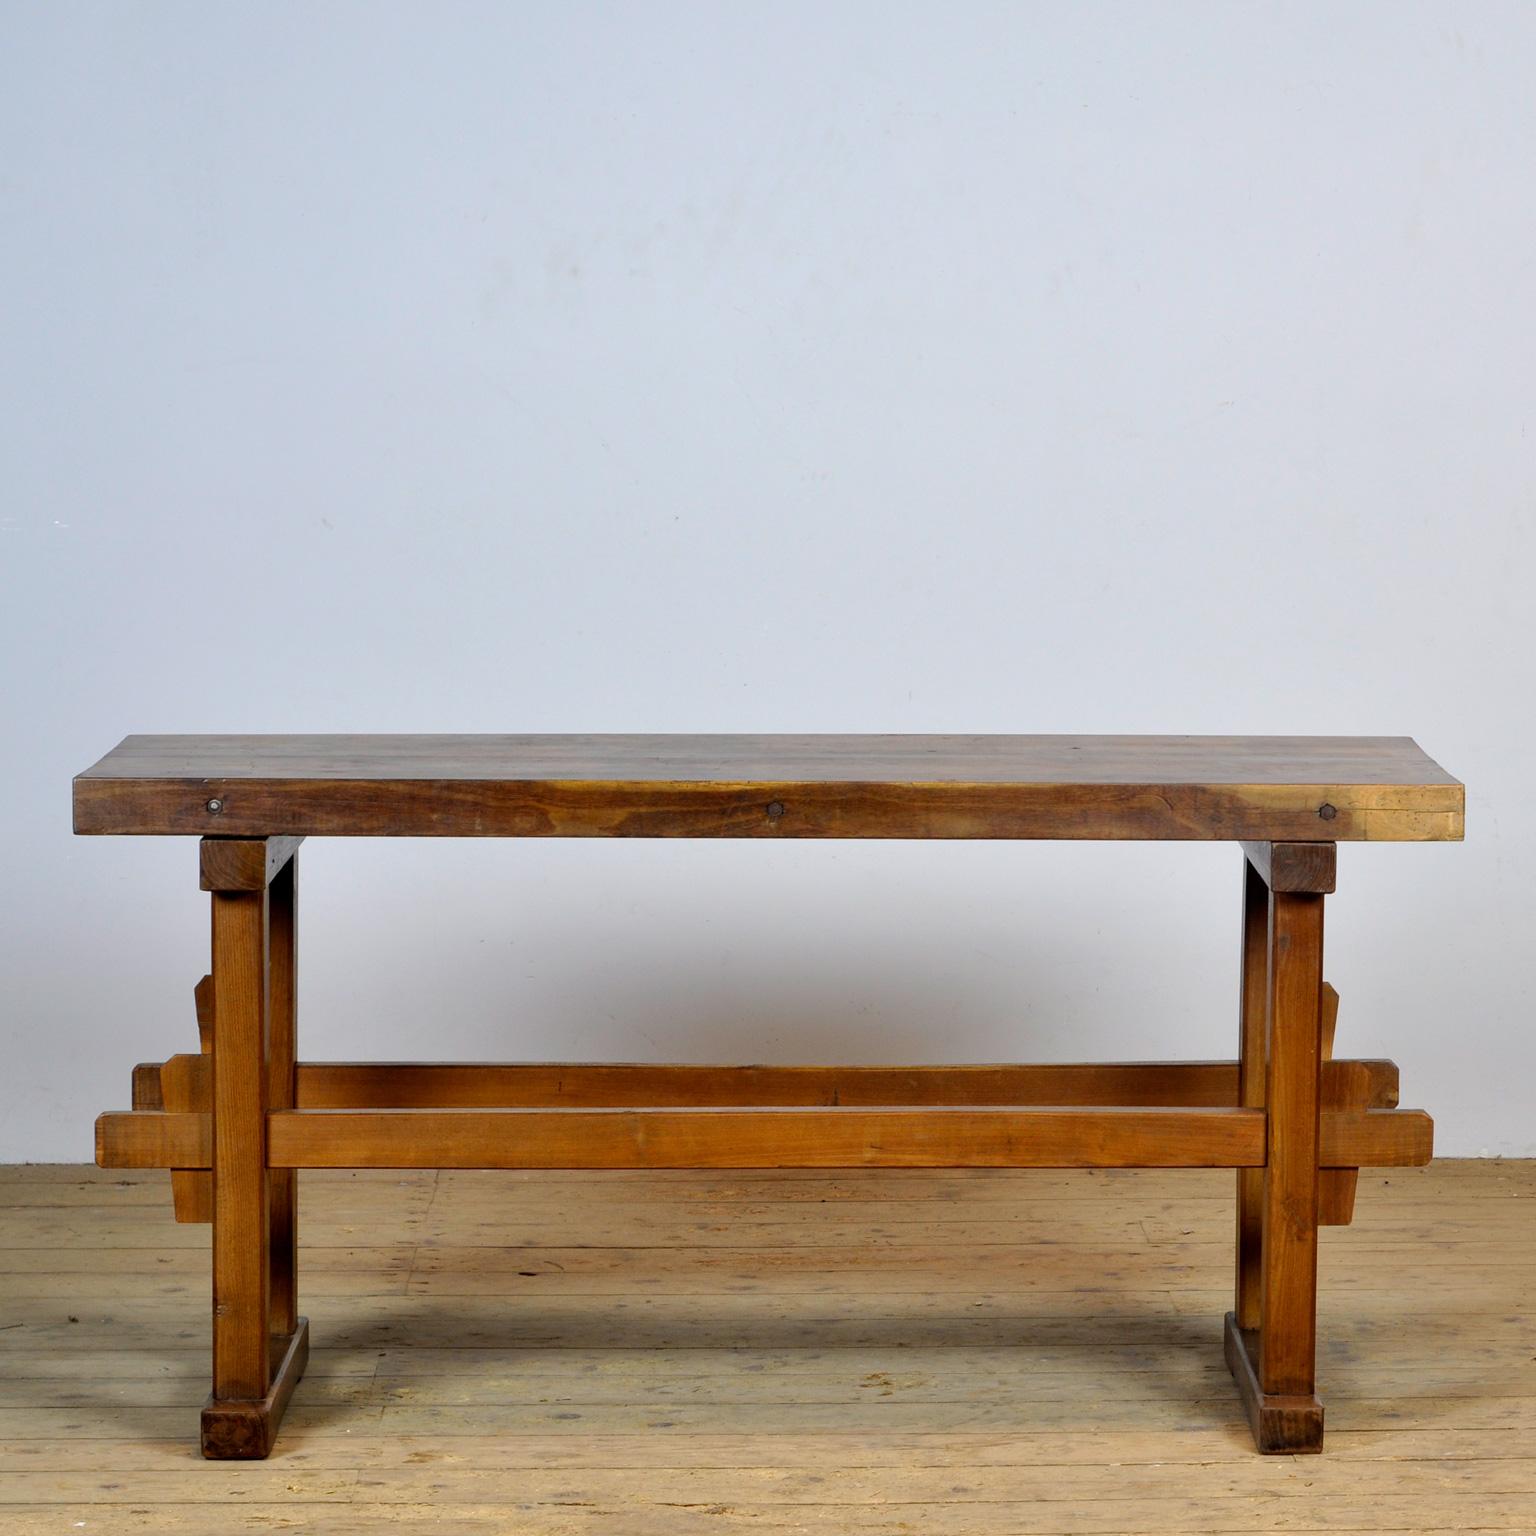 Oak farmers worktable with a nice top of 6.5 cm thick. The top is strengthened with 3 iron bars. 